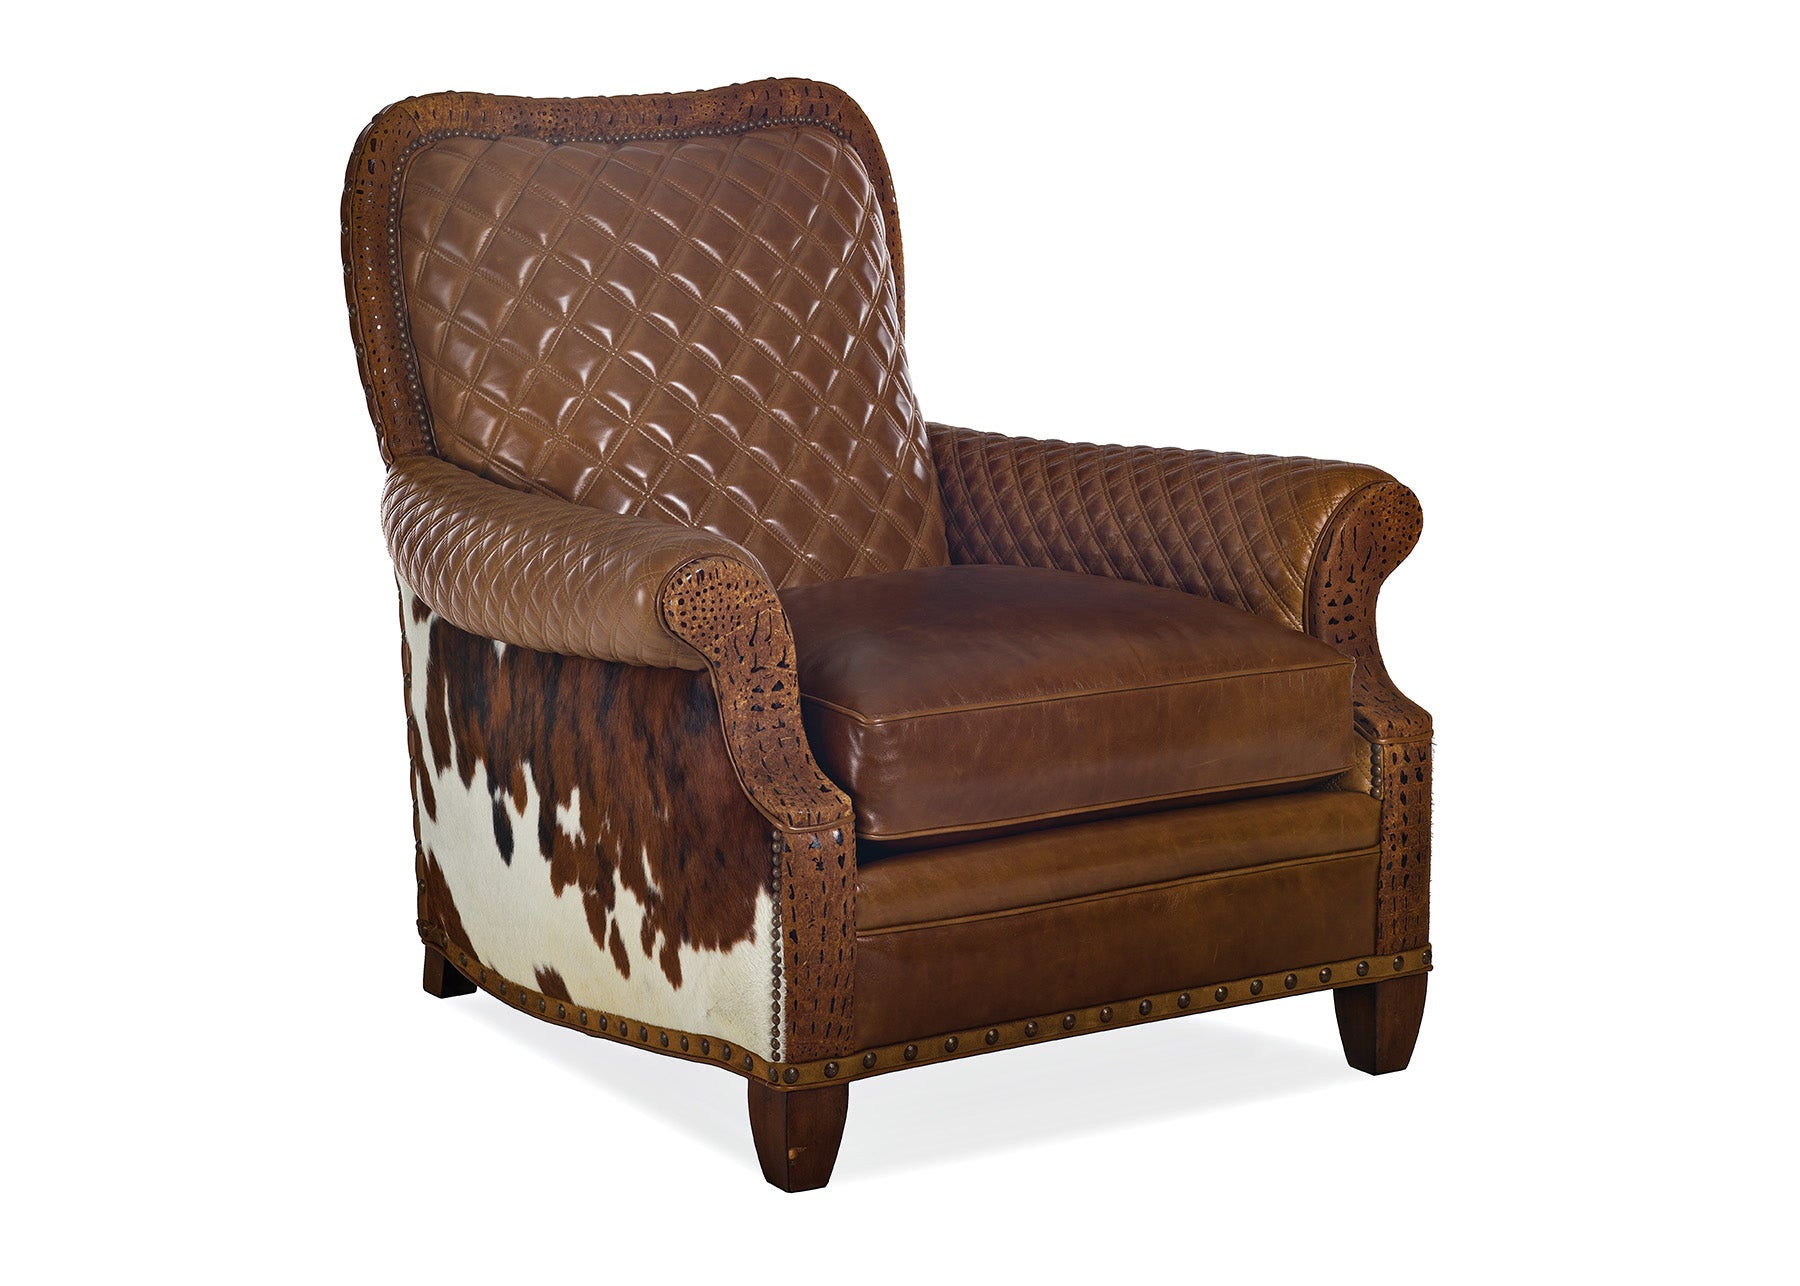 Harvest Chair with Cowhide